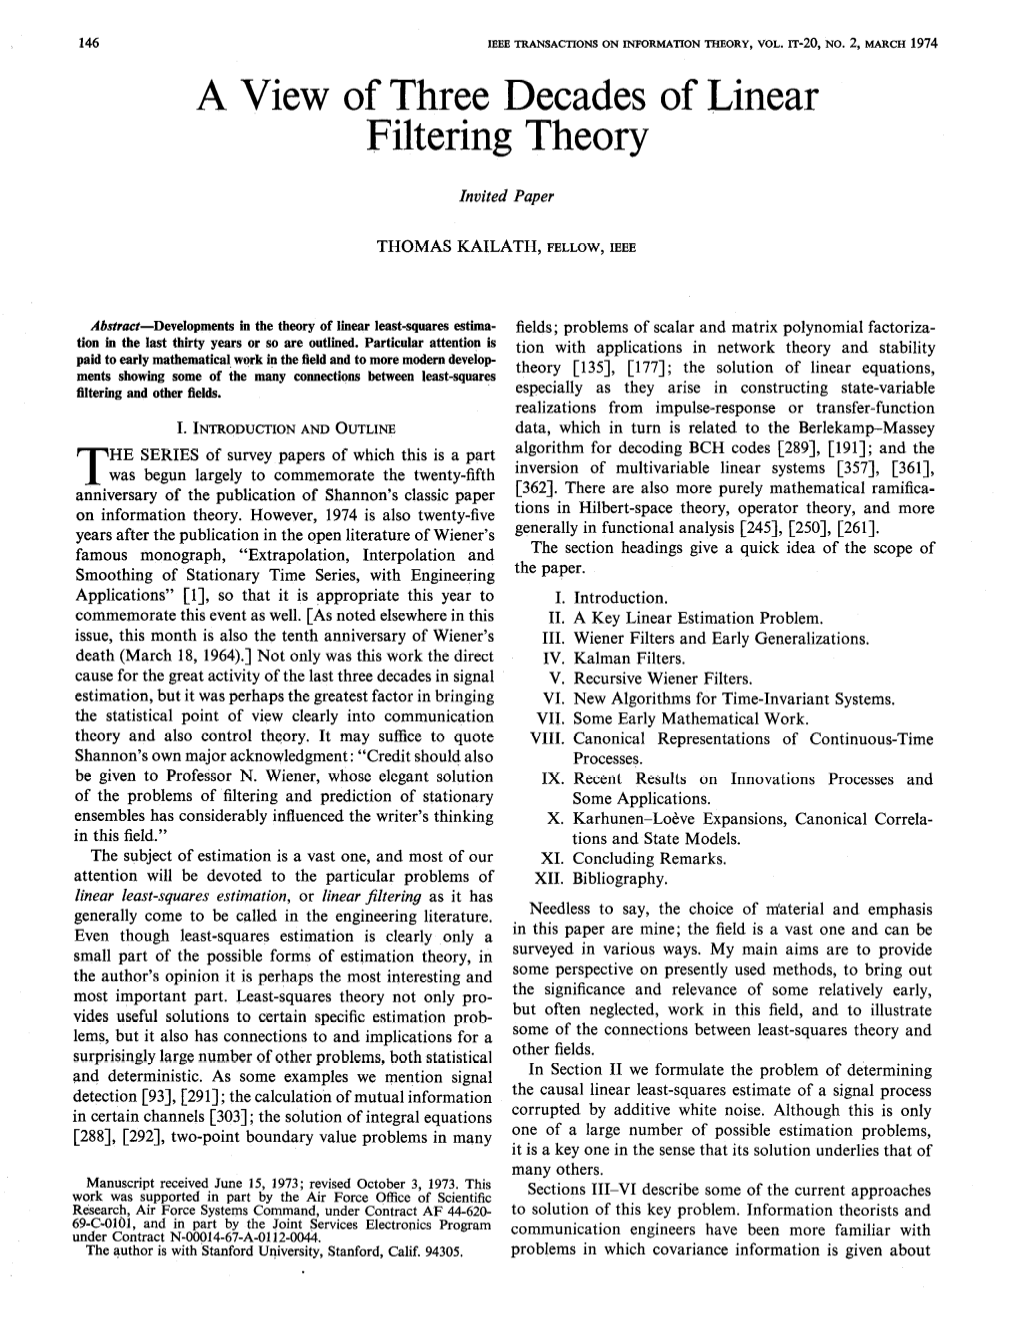 A View of Three Decades of Linear Filtering Theory